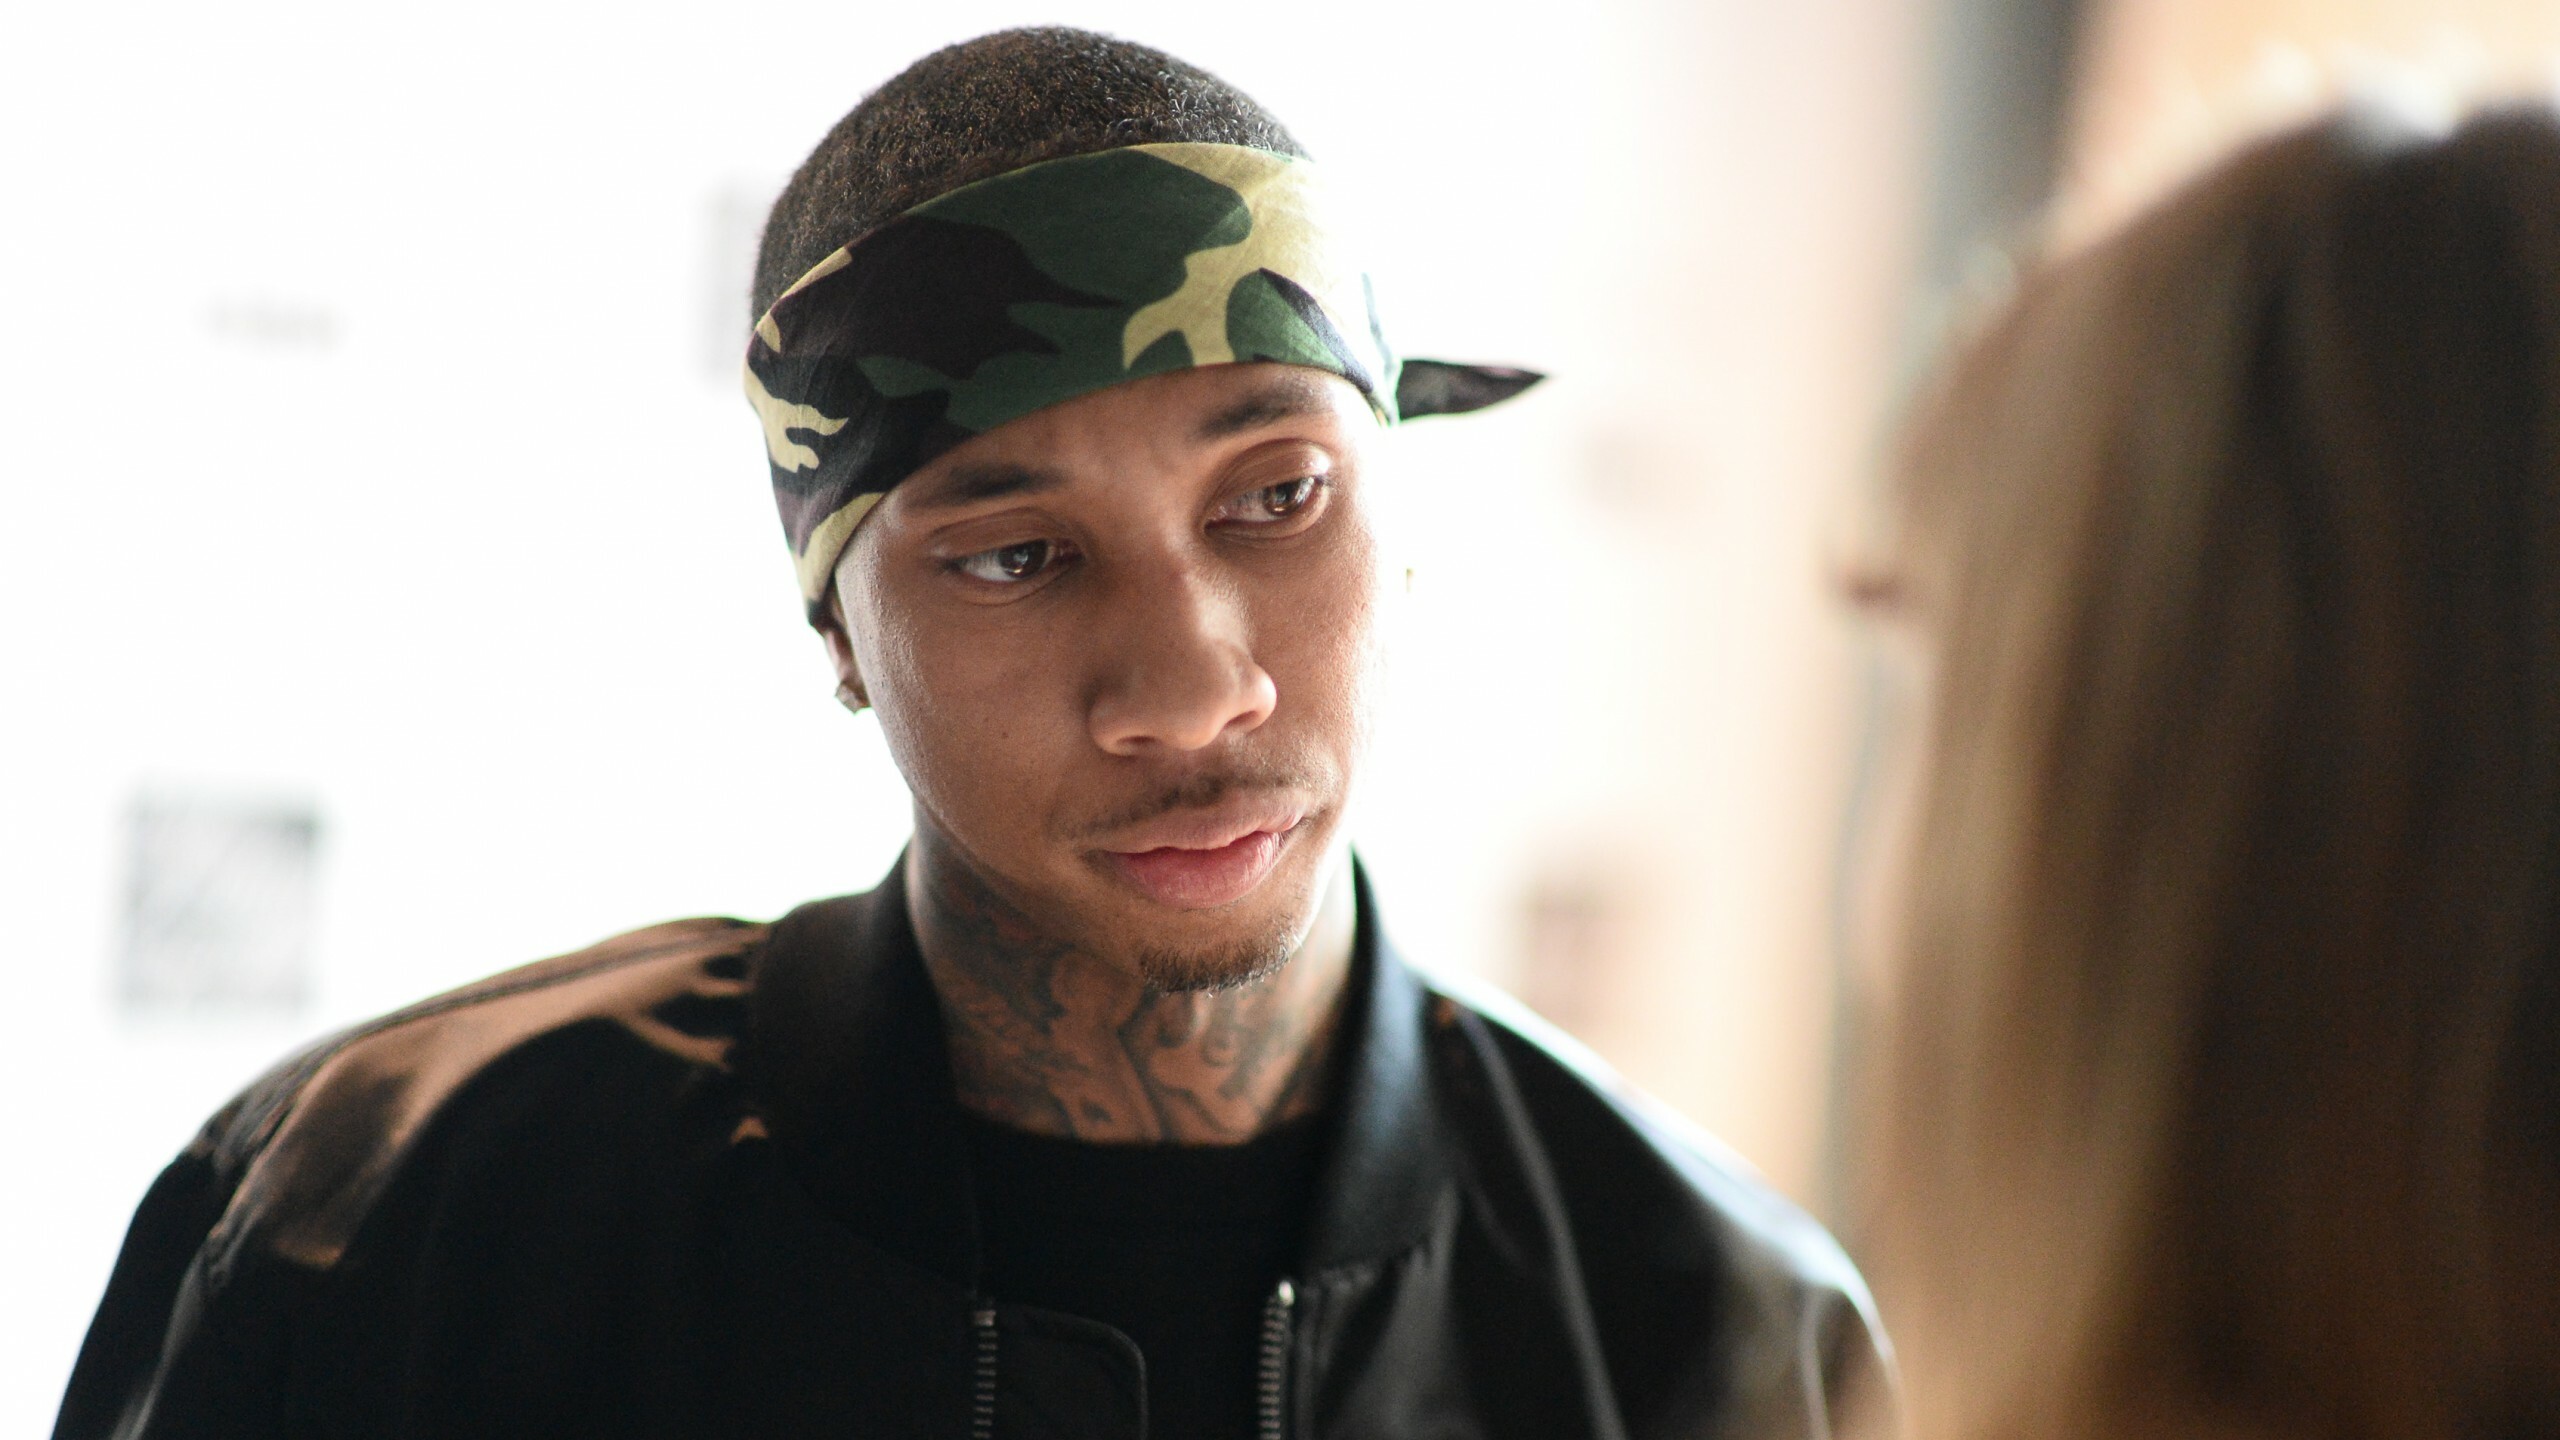 Tyga: "Still Got It", featuring Drake, was released on October 4, 2011. 2560x1440 HD Background.